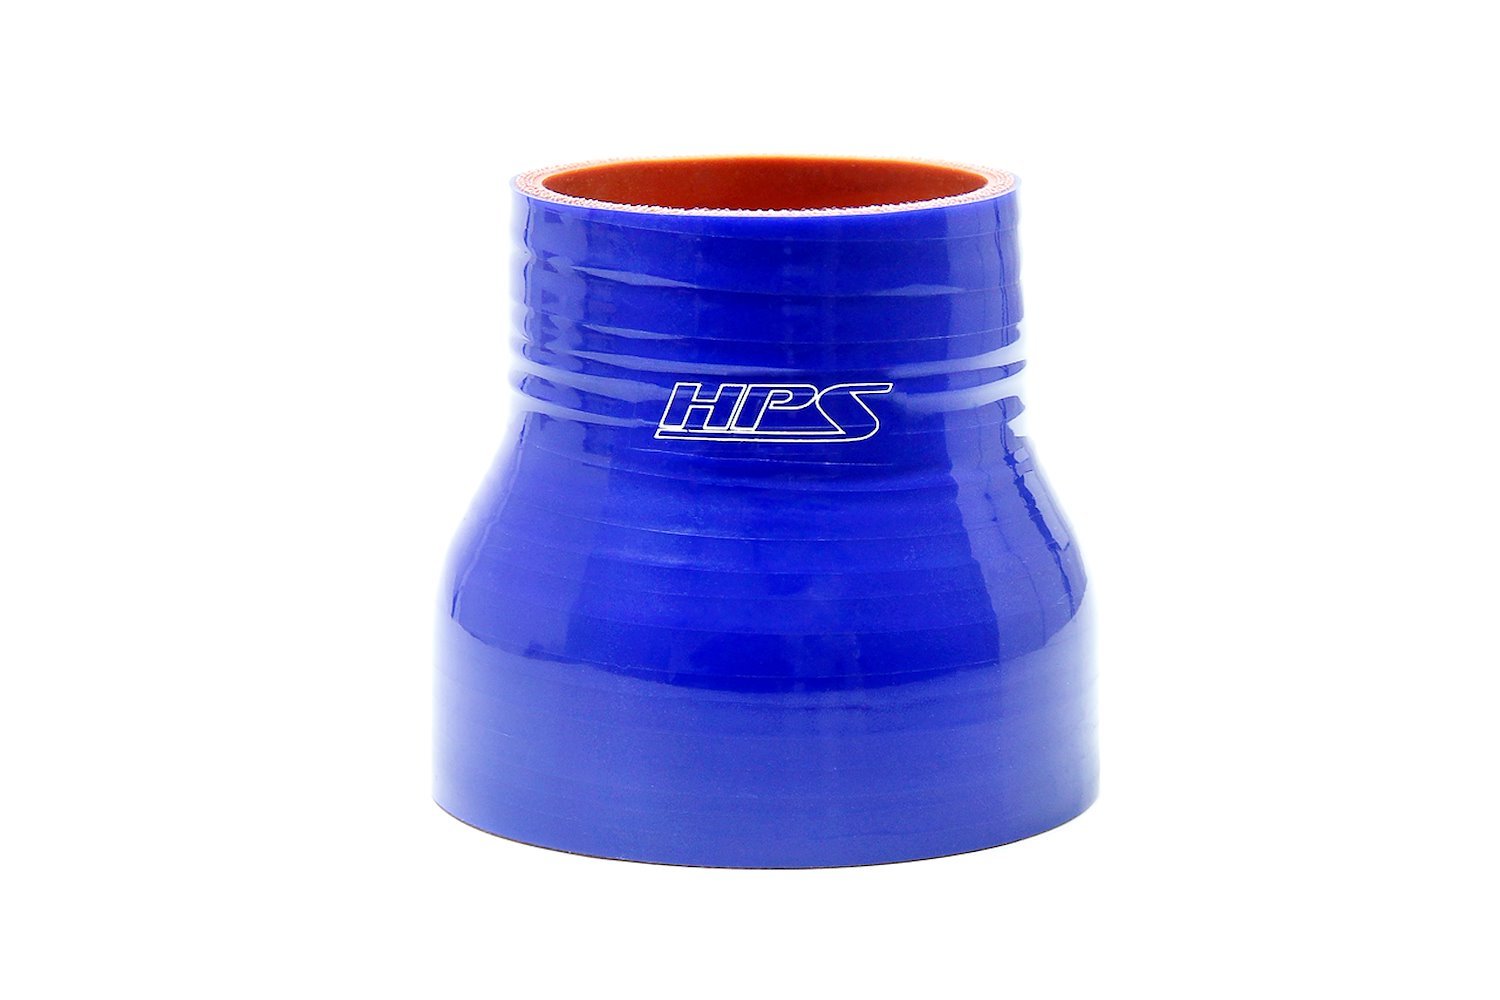 HTSR-187-225-BLUE Silicone Reducer Hose, High-Temp 4-Ply Reinforced, 1-7/8 in. - 2-1/4 in. ID, 3 in. Long, Blue